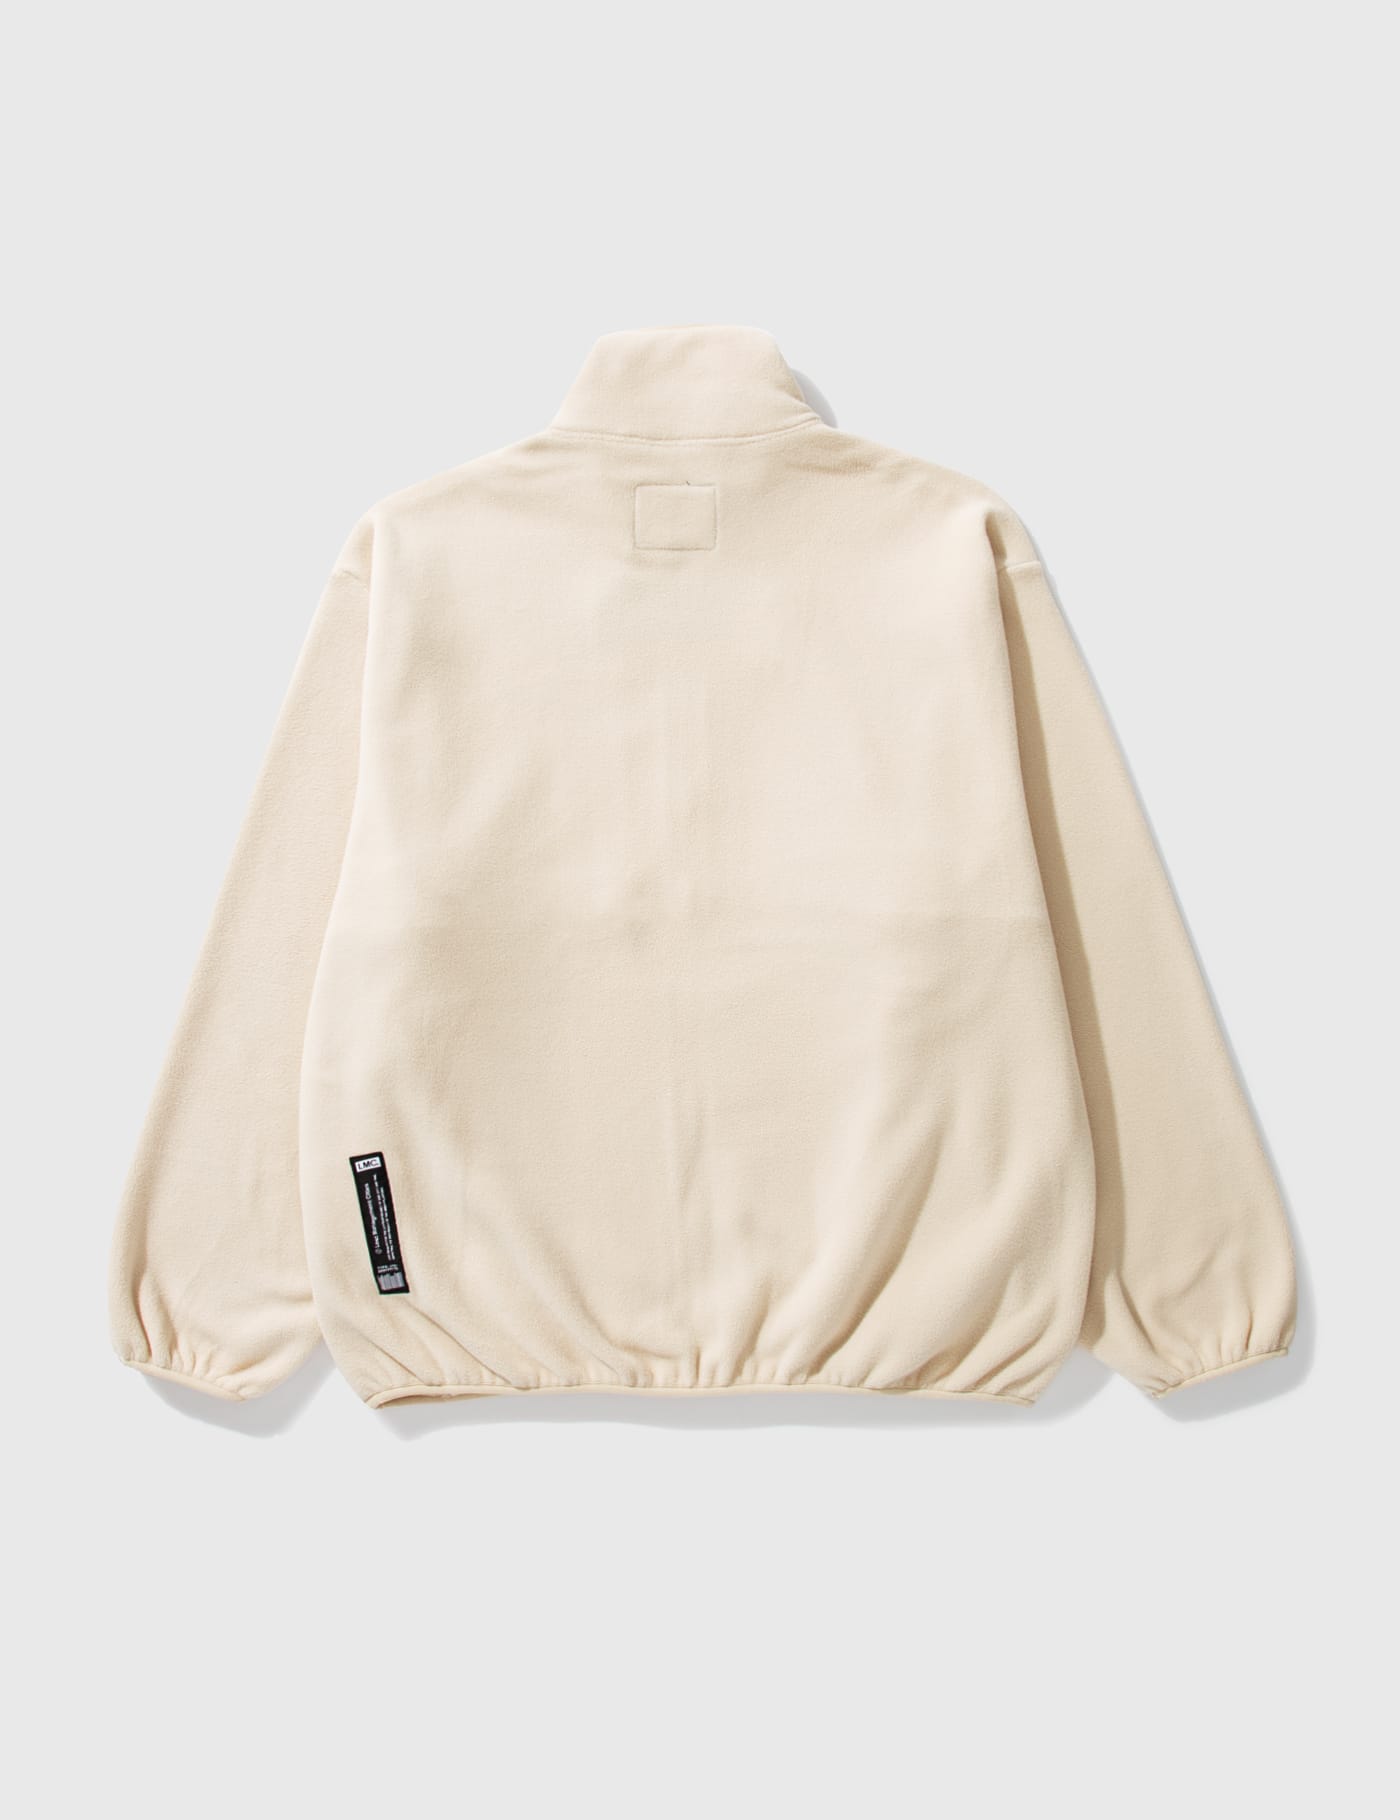 LMC - Fleece Team Jacket | HBX - Globally Curated Fashion and Lifestyle by  Hypebeast